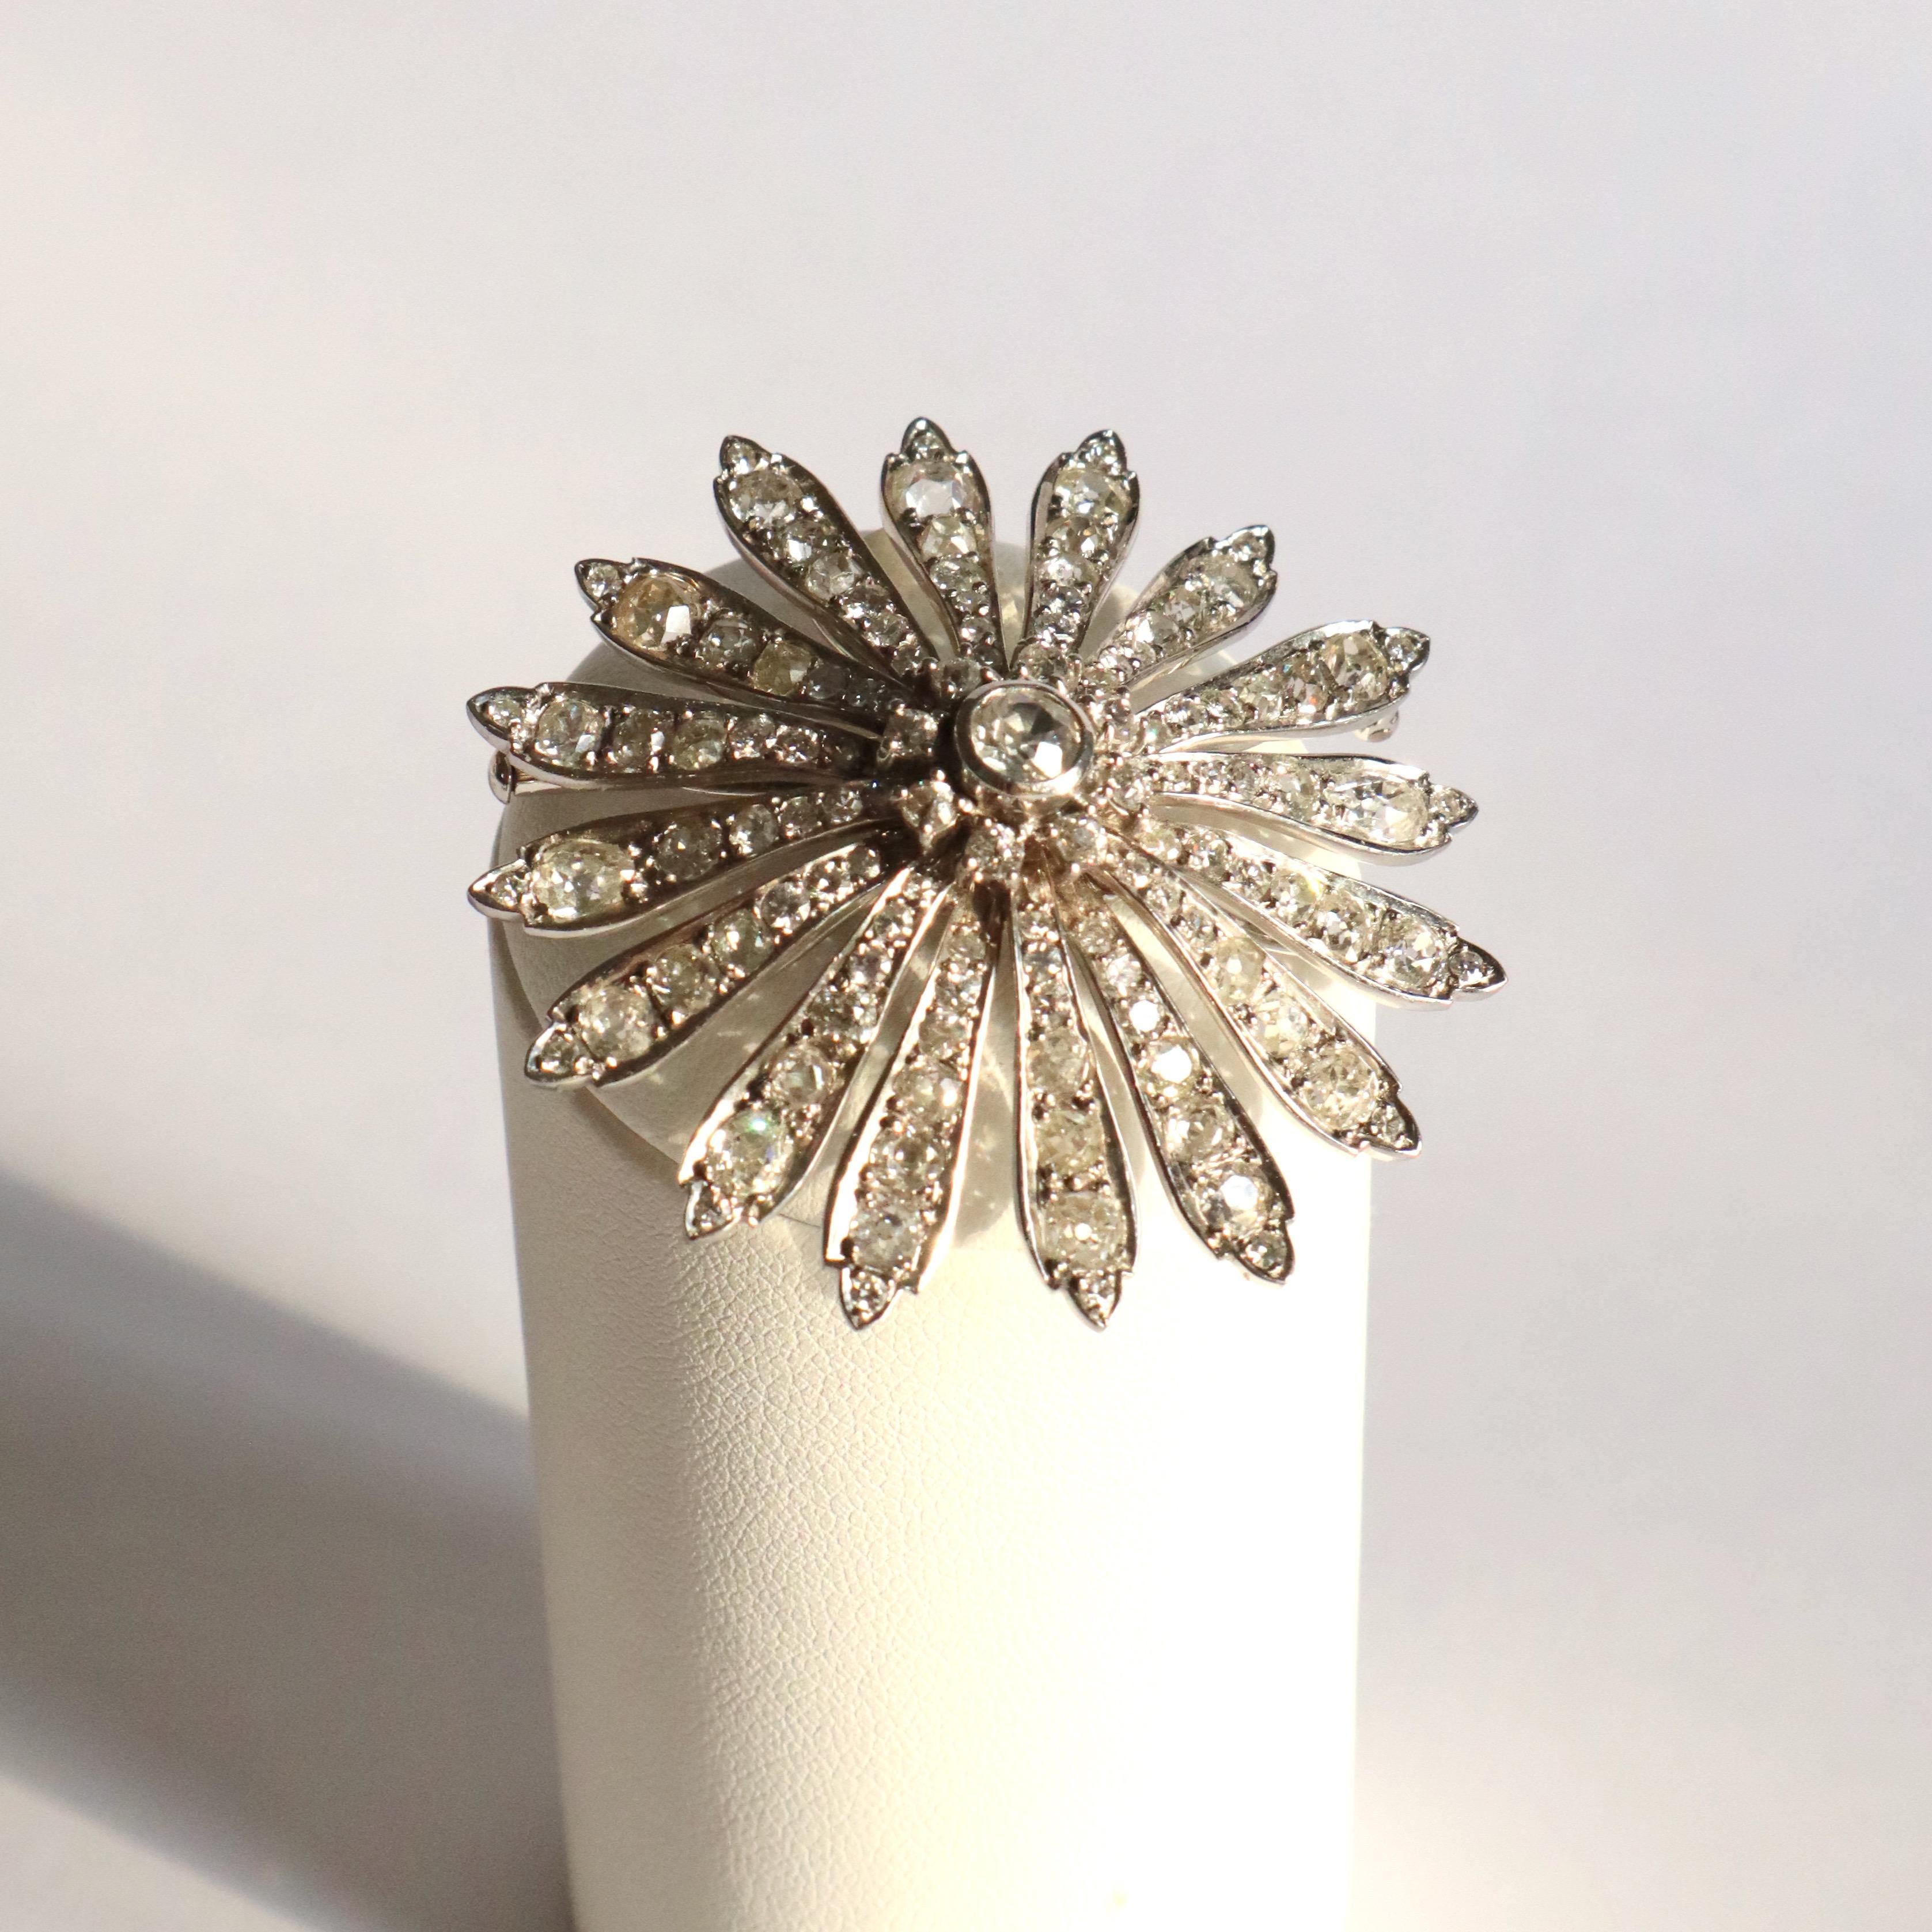 Vintage Daisy Brooch circa 1900-1930 in 18 Carat White Gold and Diamonds In Good Condition For Sale In Paris, FR